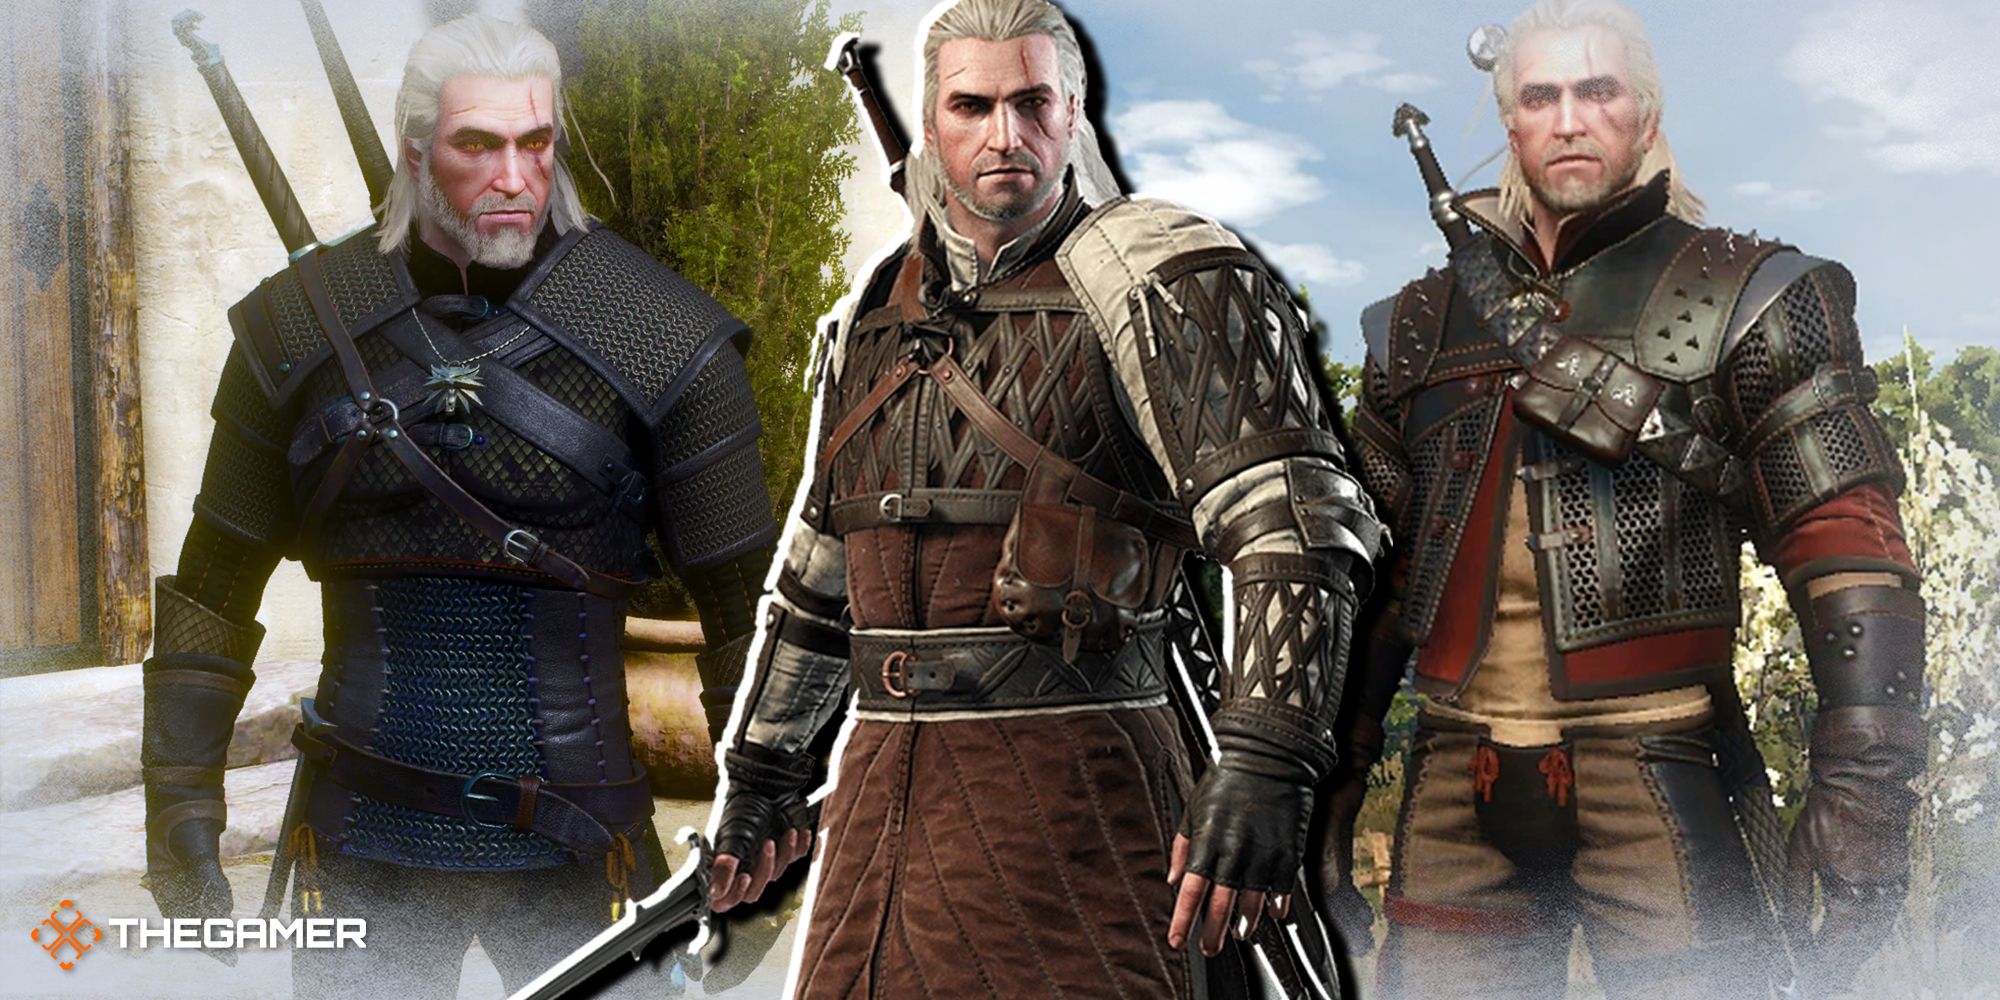 The Witcher 3 armor crafting, types and witcher gear explained